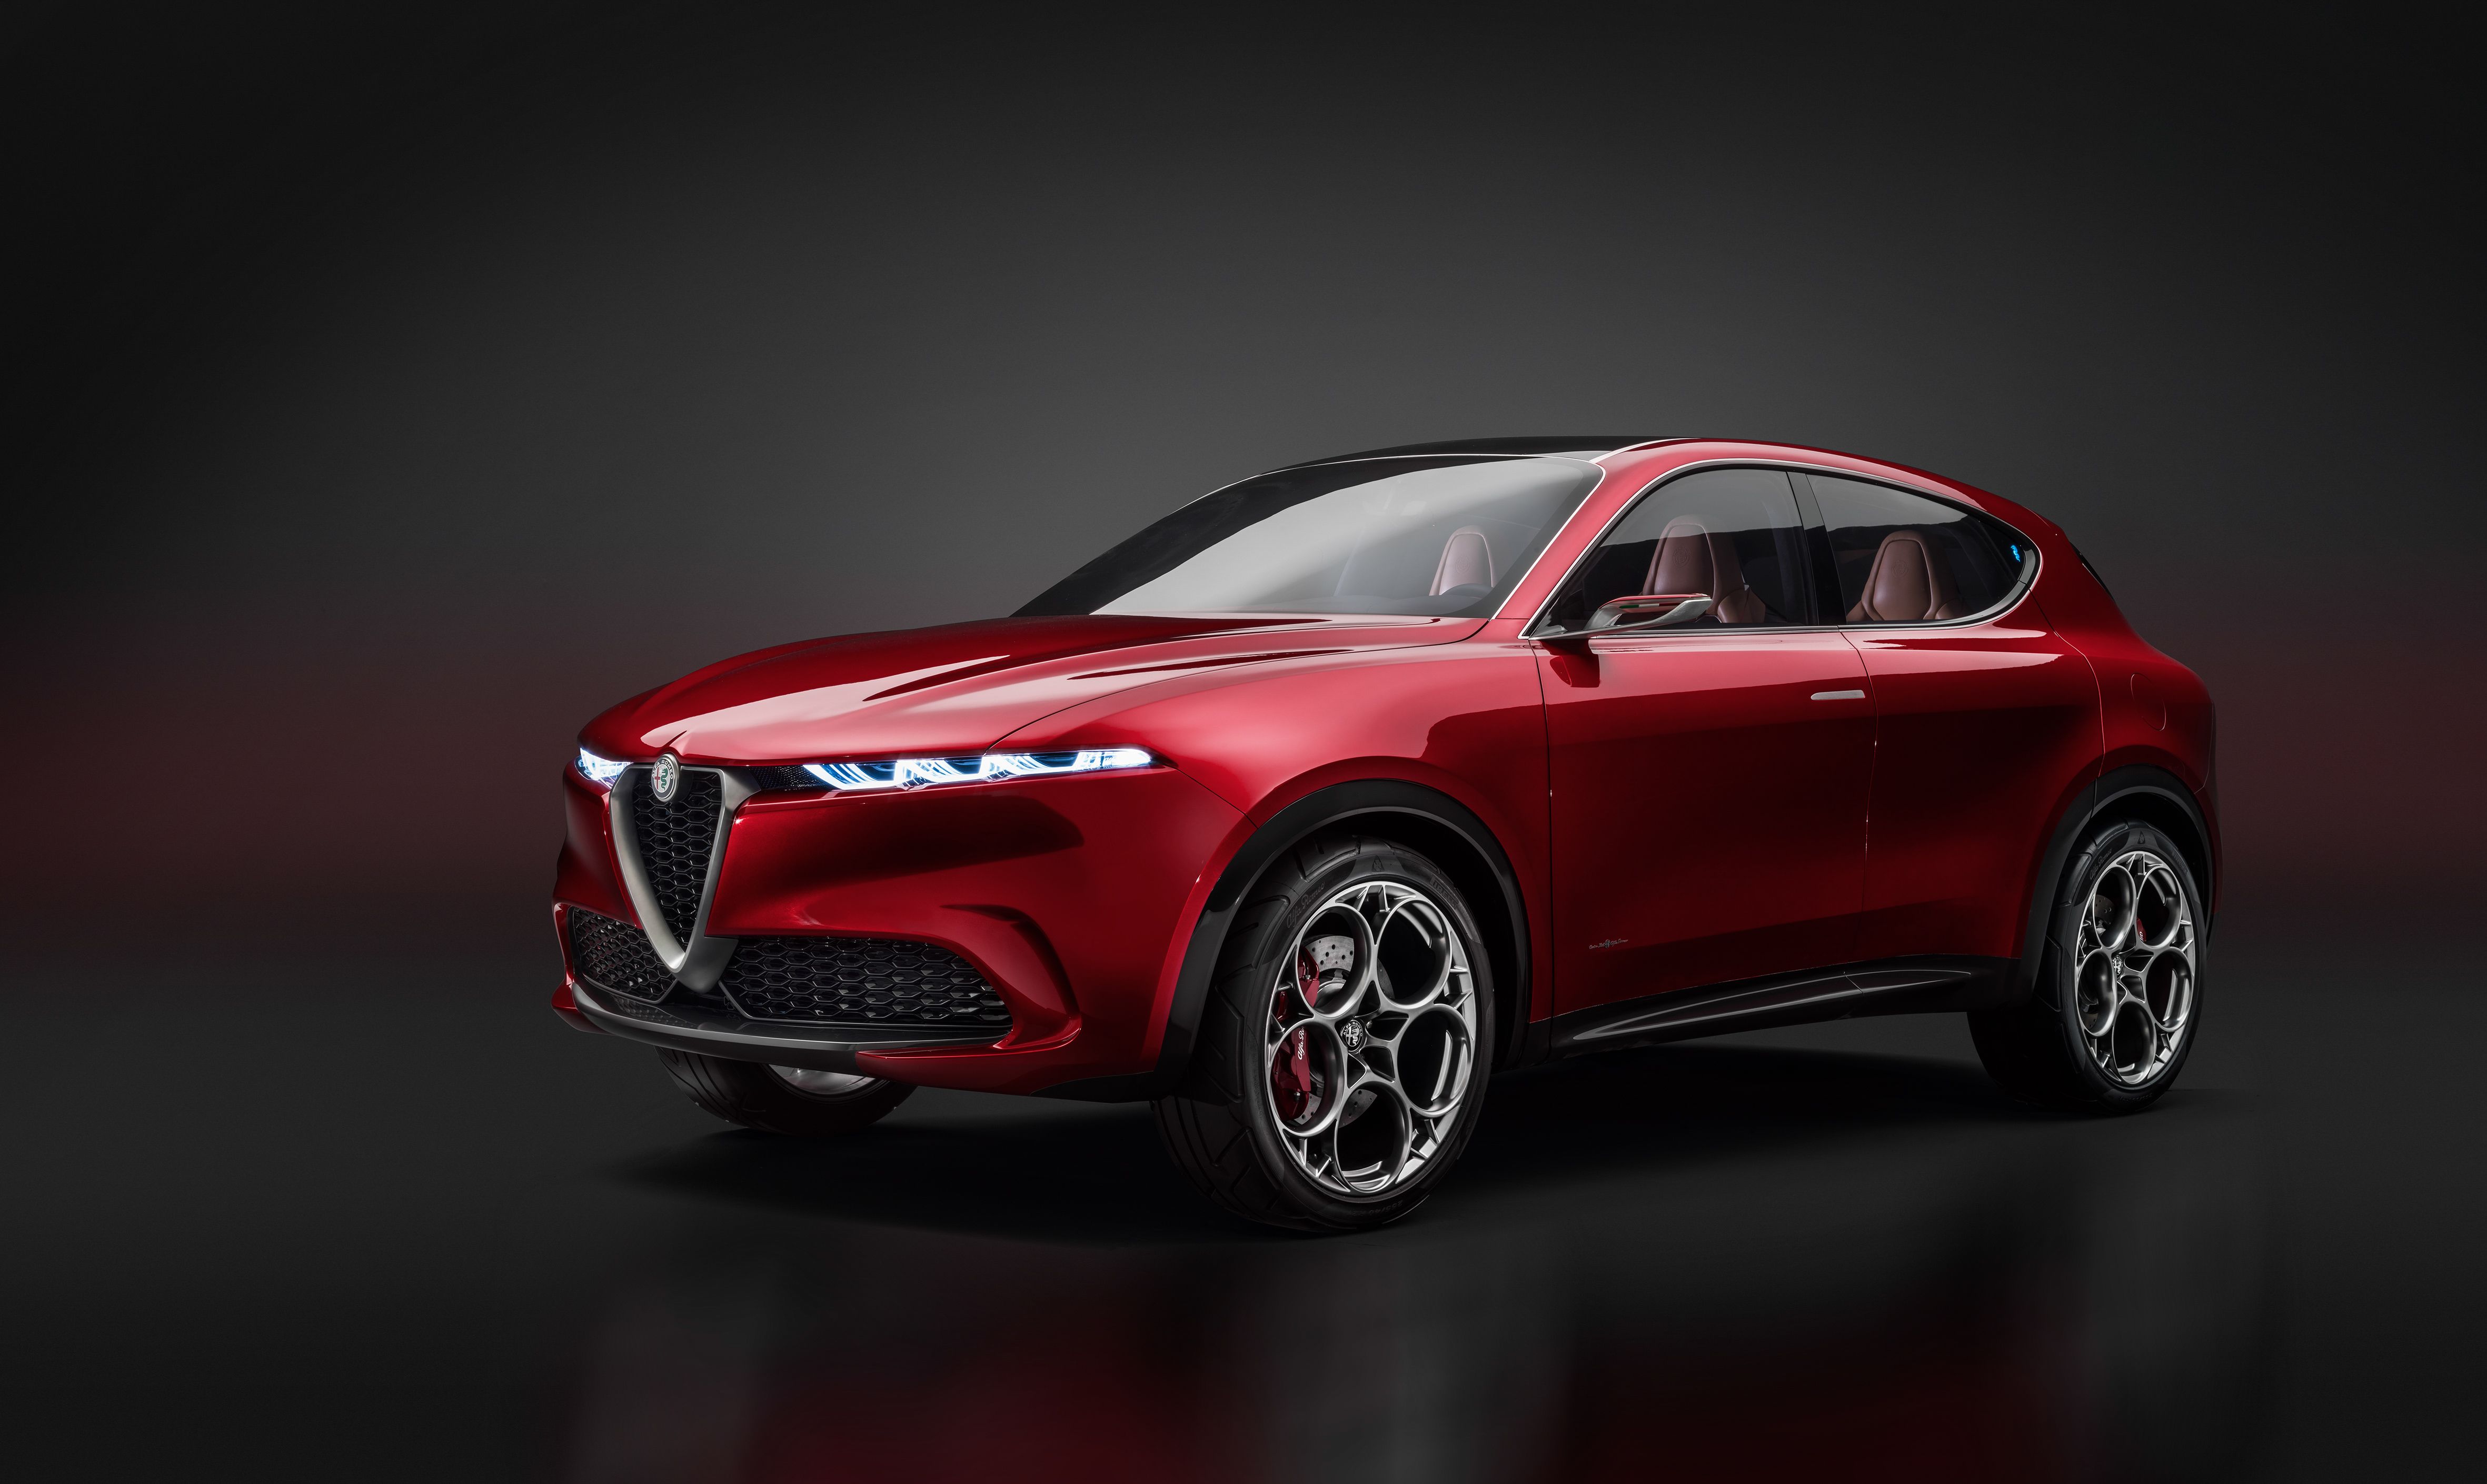 Best Small Crossover 2021 2021 Alfa Romeo Tonale Is the Small Crossover Alfa Needs Right Now